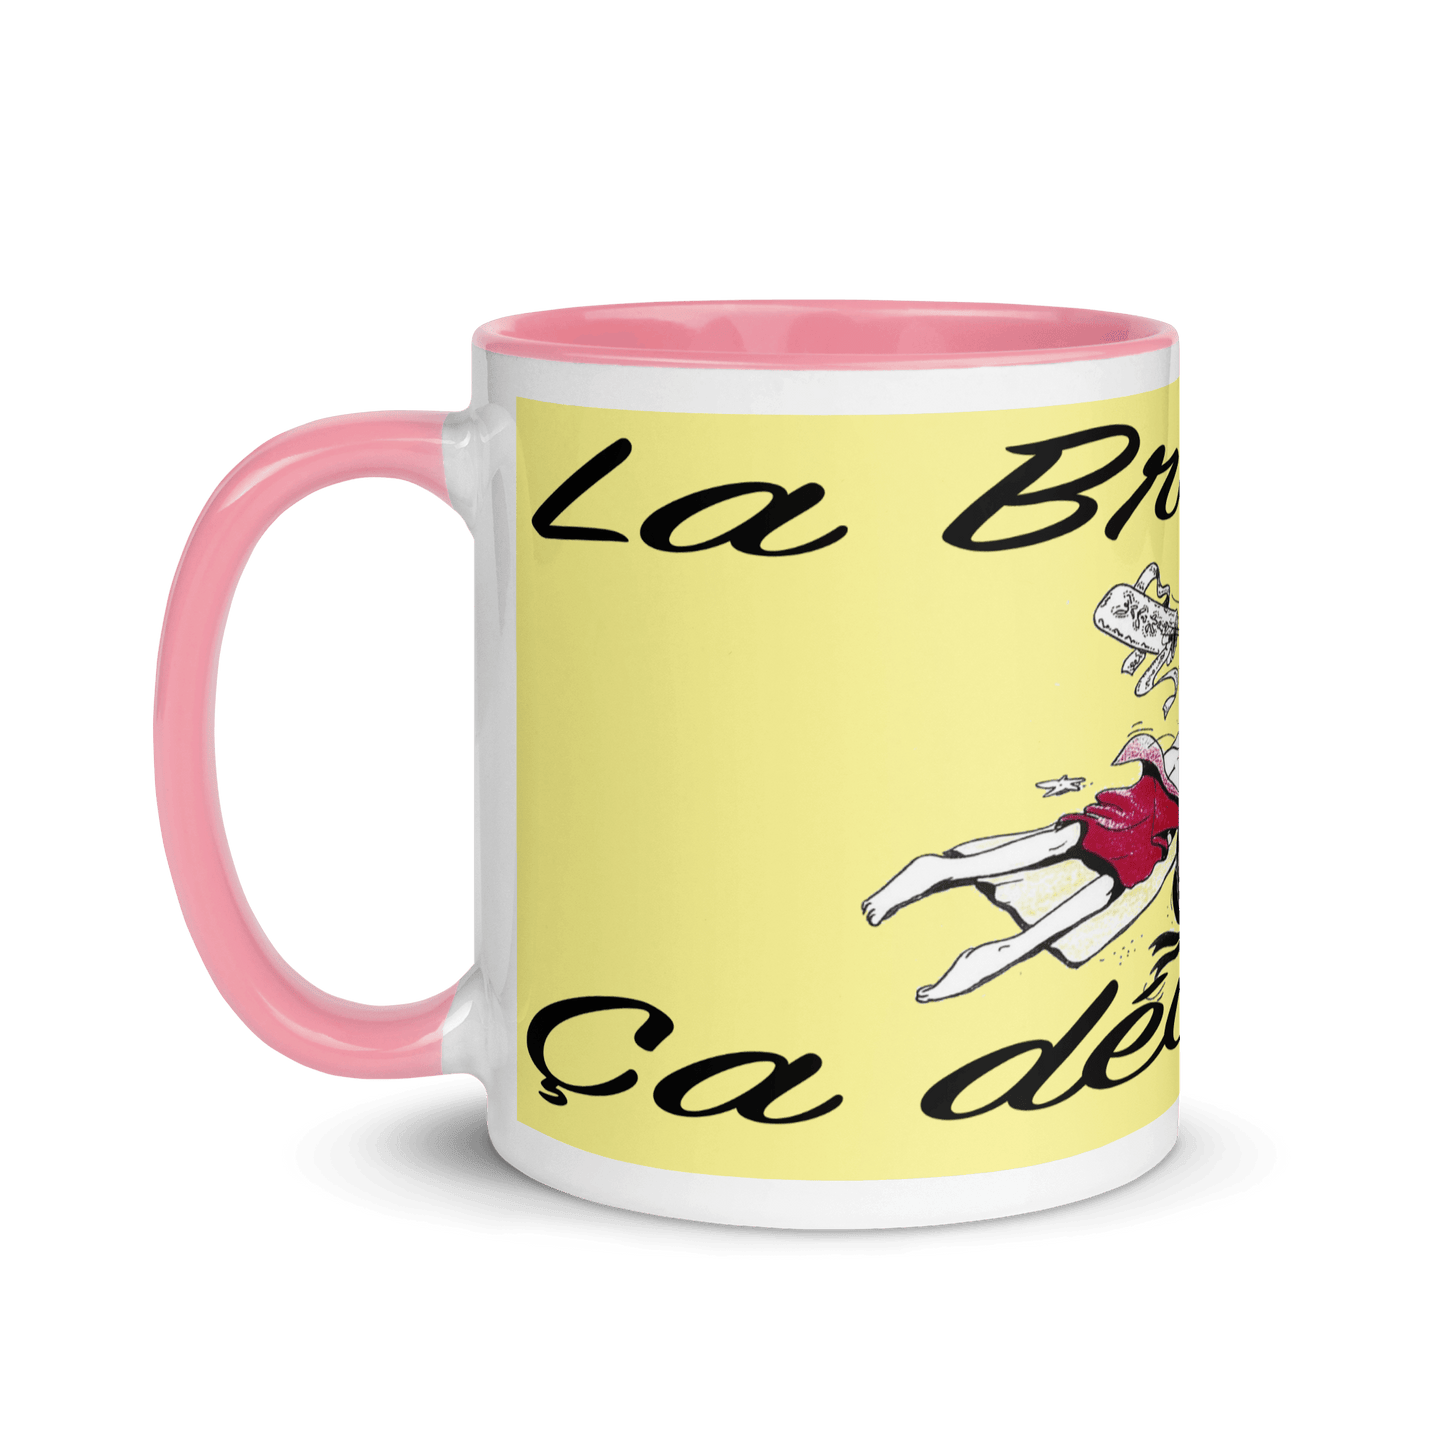 Mug with Colorful Interior Brittany is amazing